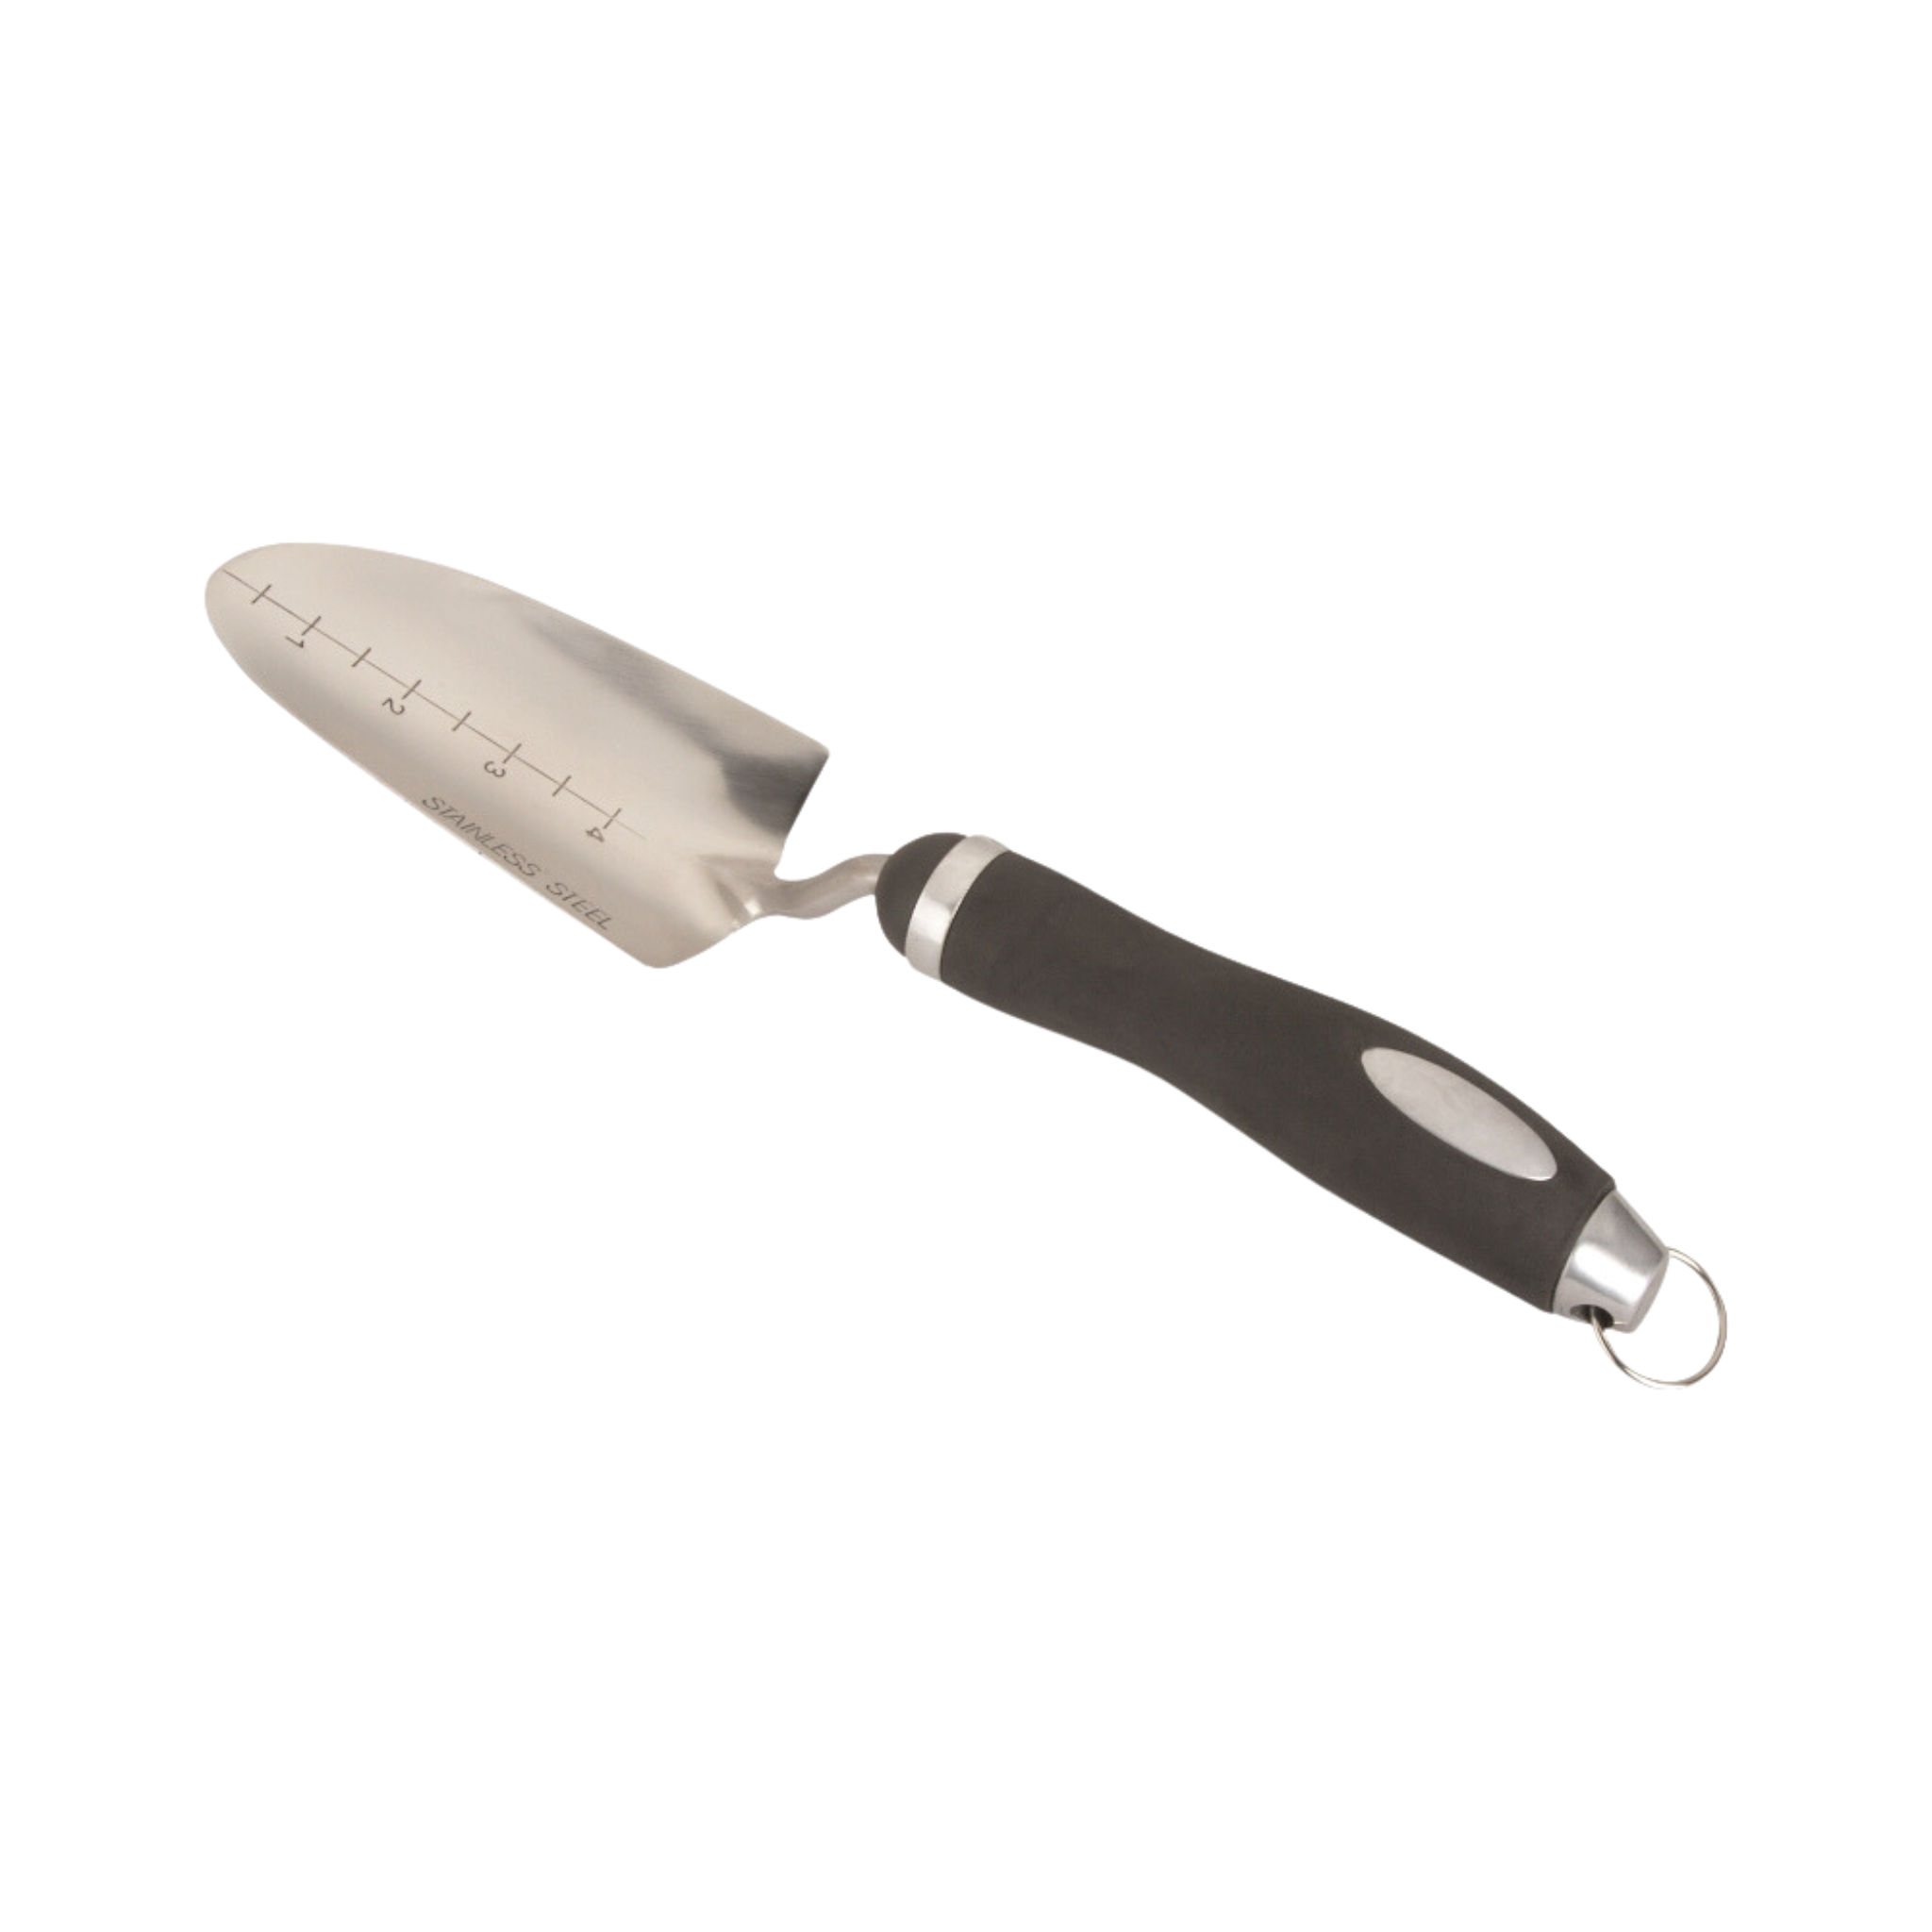 13" Stainless Steel Transplanting Trowel with Cushion Grip Handle